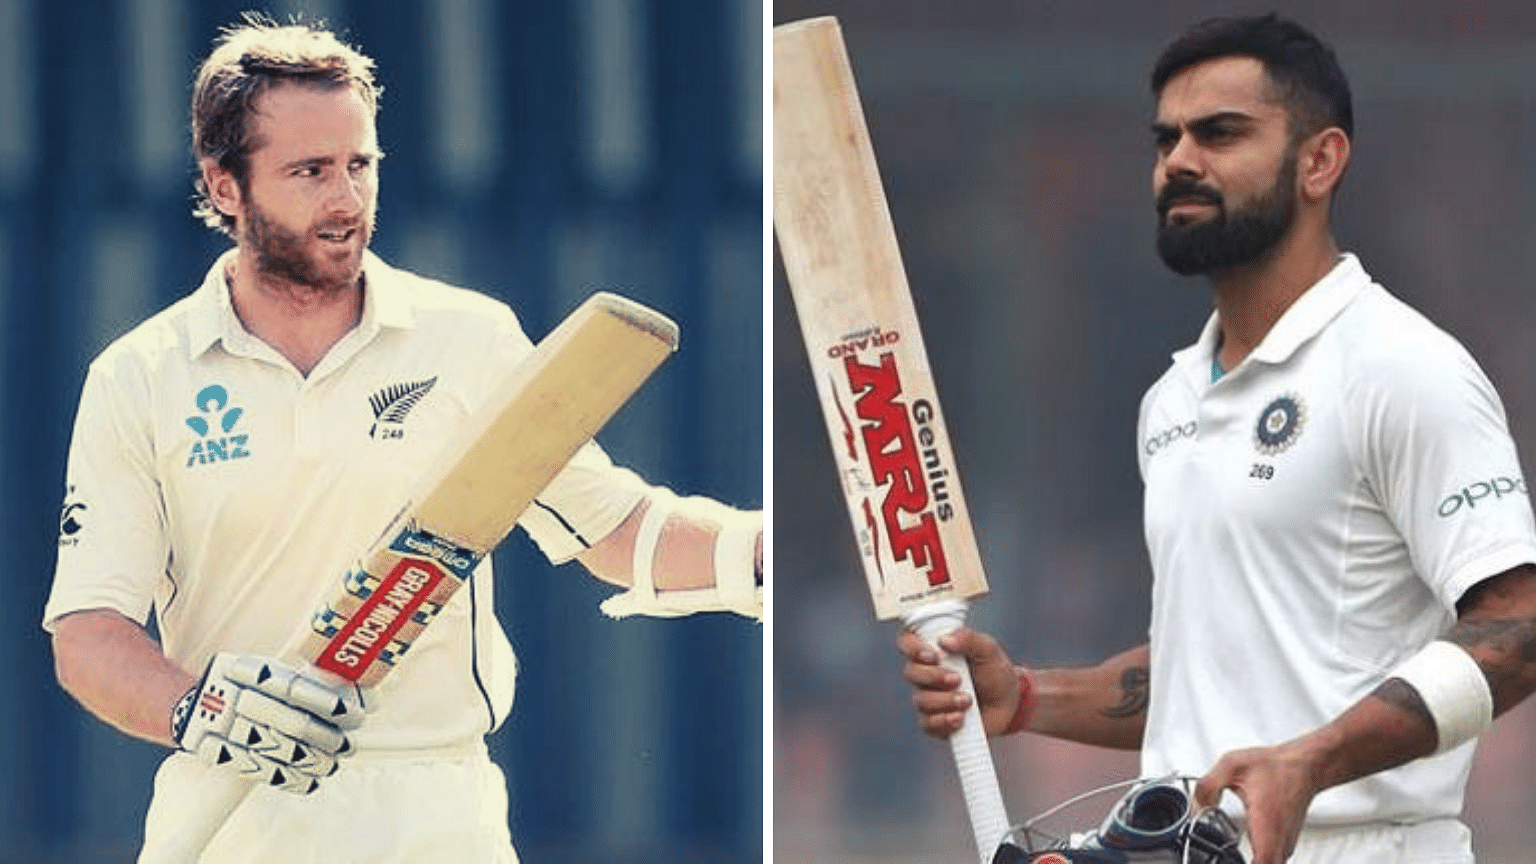 Kane Williamson (left) has reached a career-best 915 rating points and narrowed the gap with the table-topper India skipper Virat Kohli (922 points).